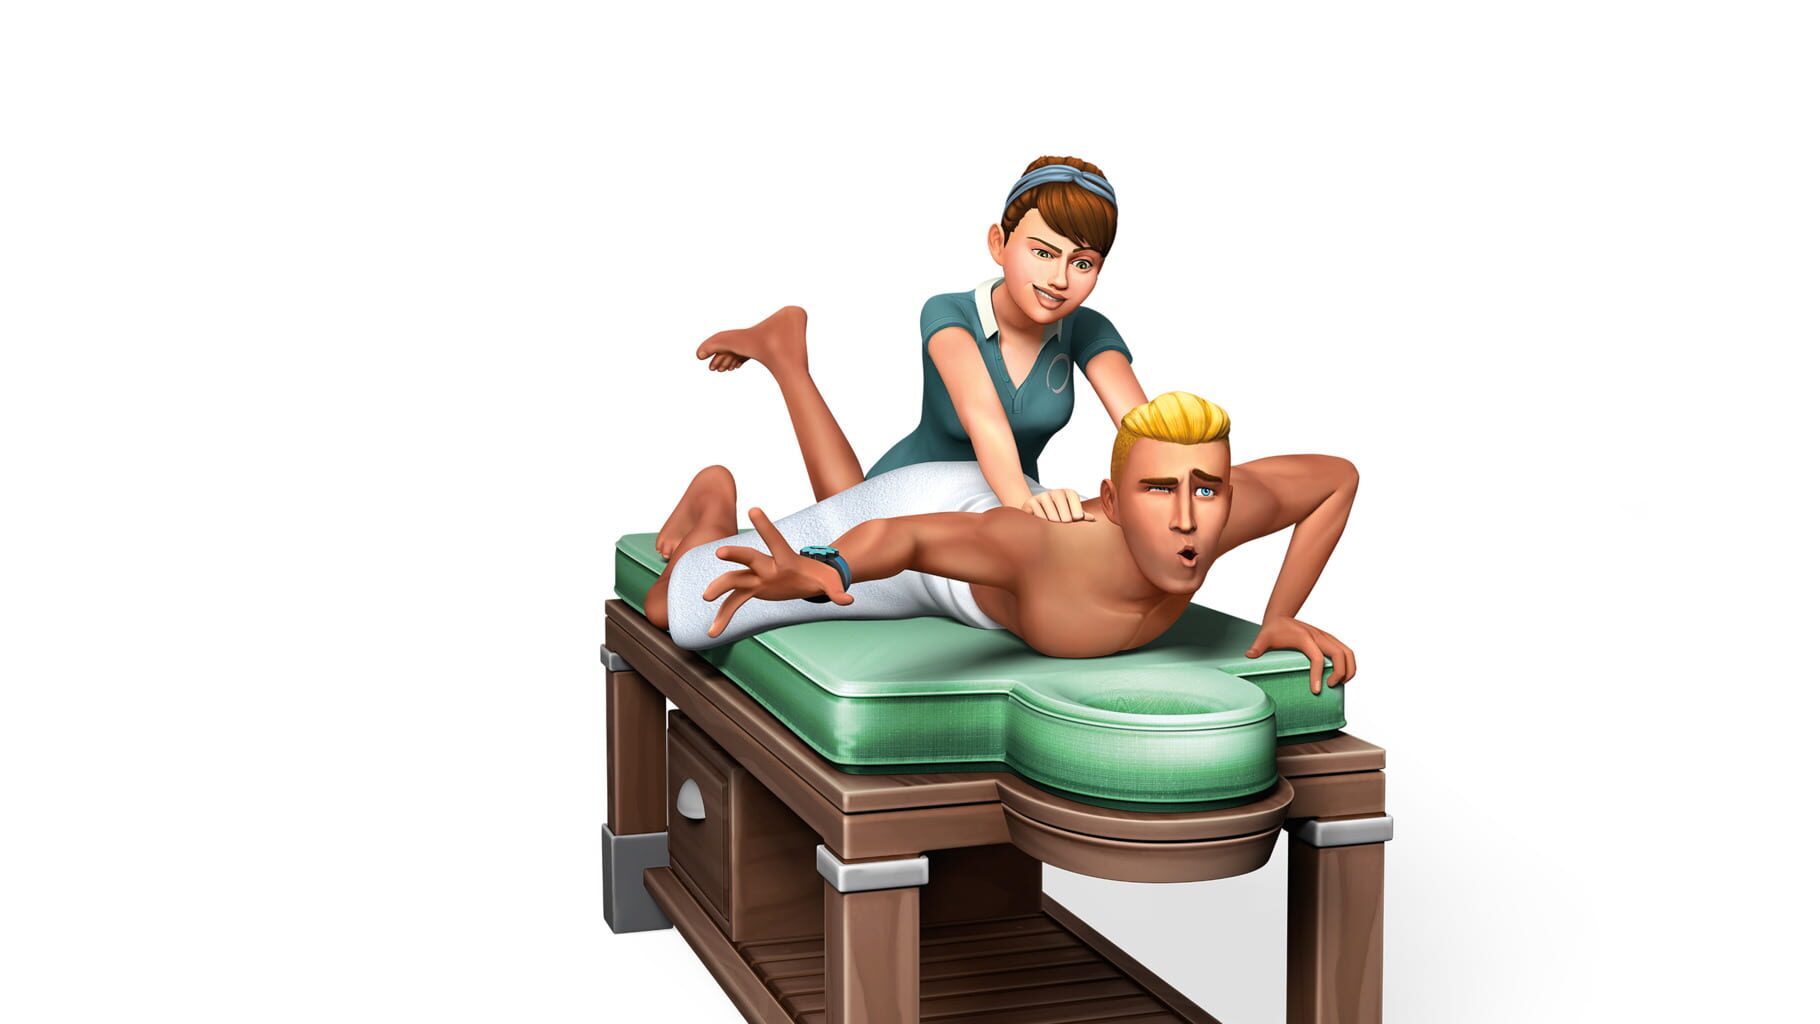 The Sims 4: Spa Day Image